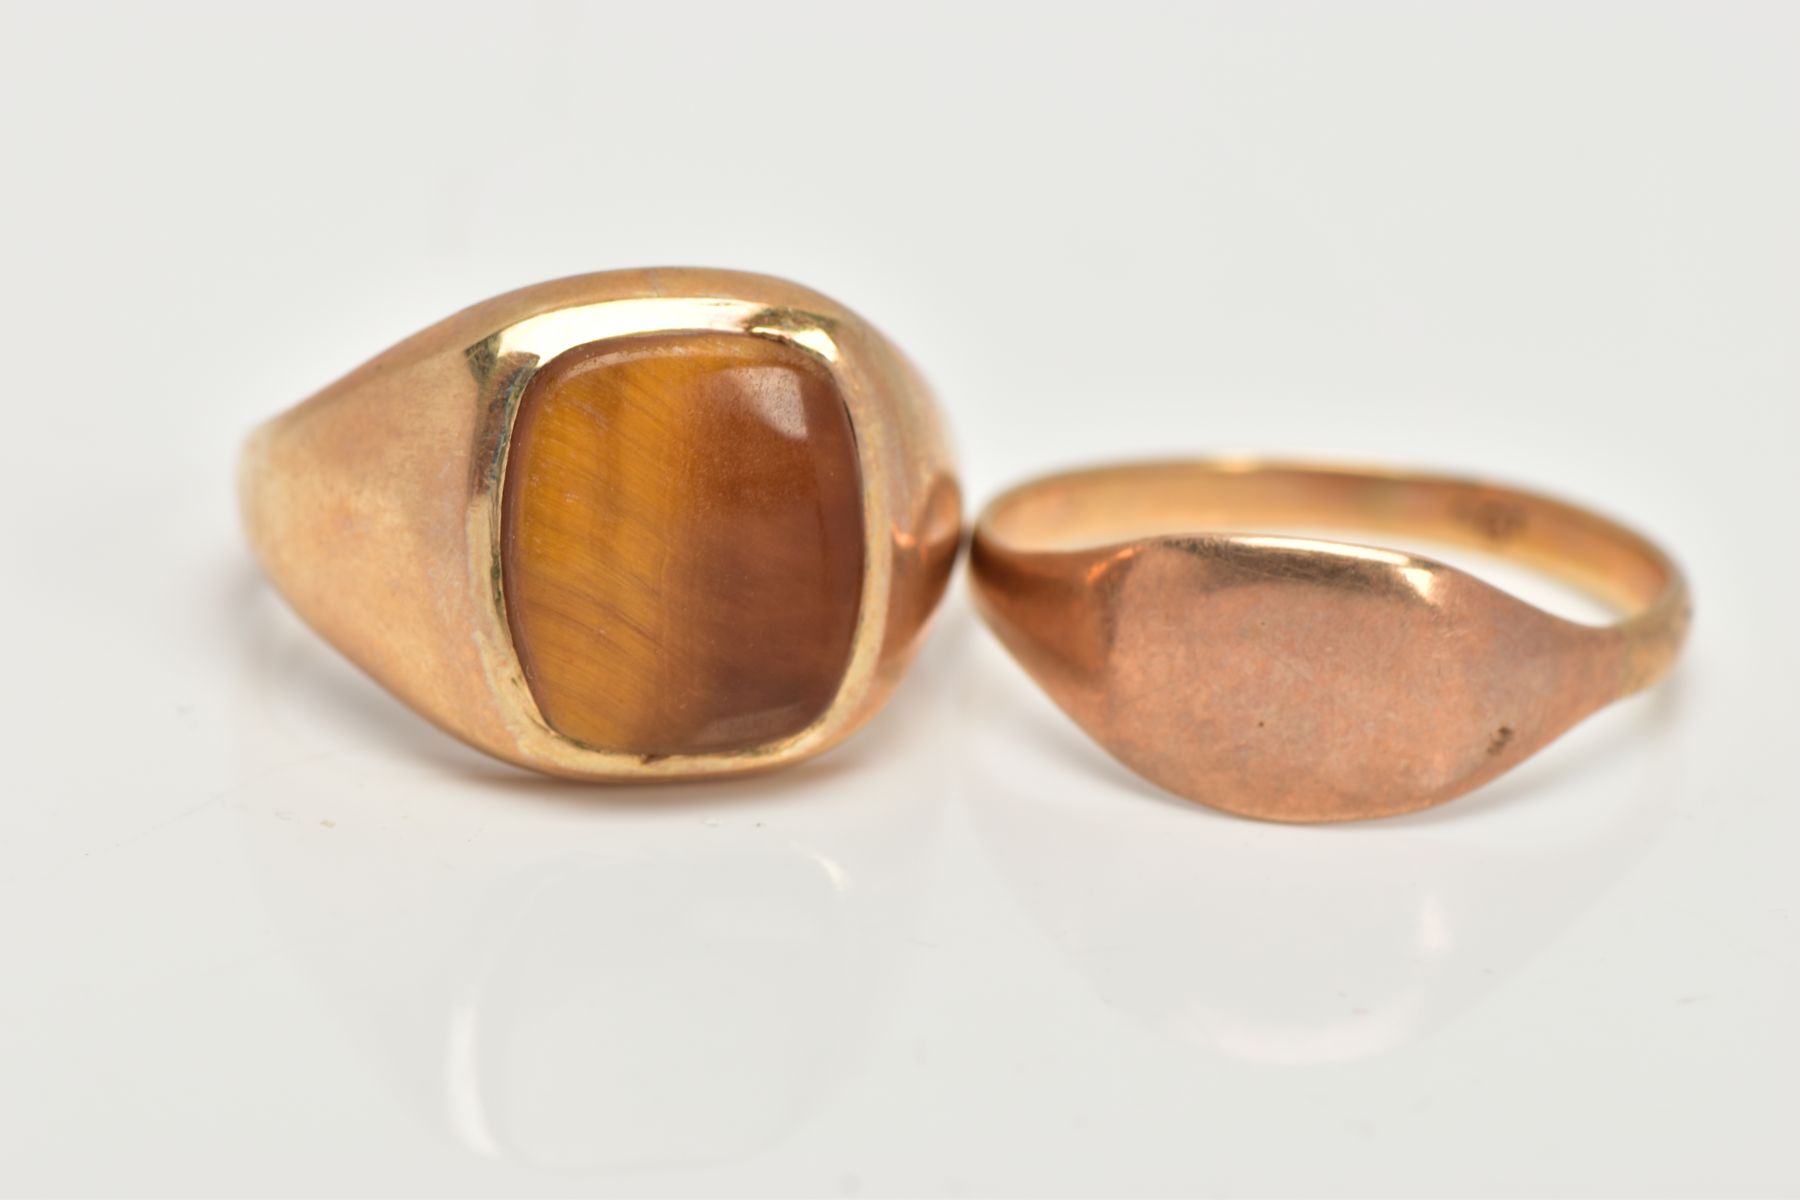 A 9CT GOLD TIGERS EYE SIGNET AND YELLOW METAL SIGNET, a large signet ring set with a squared